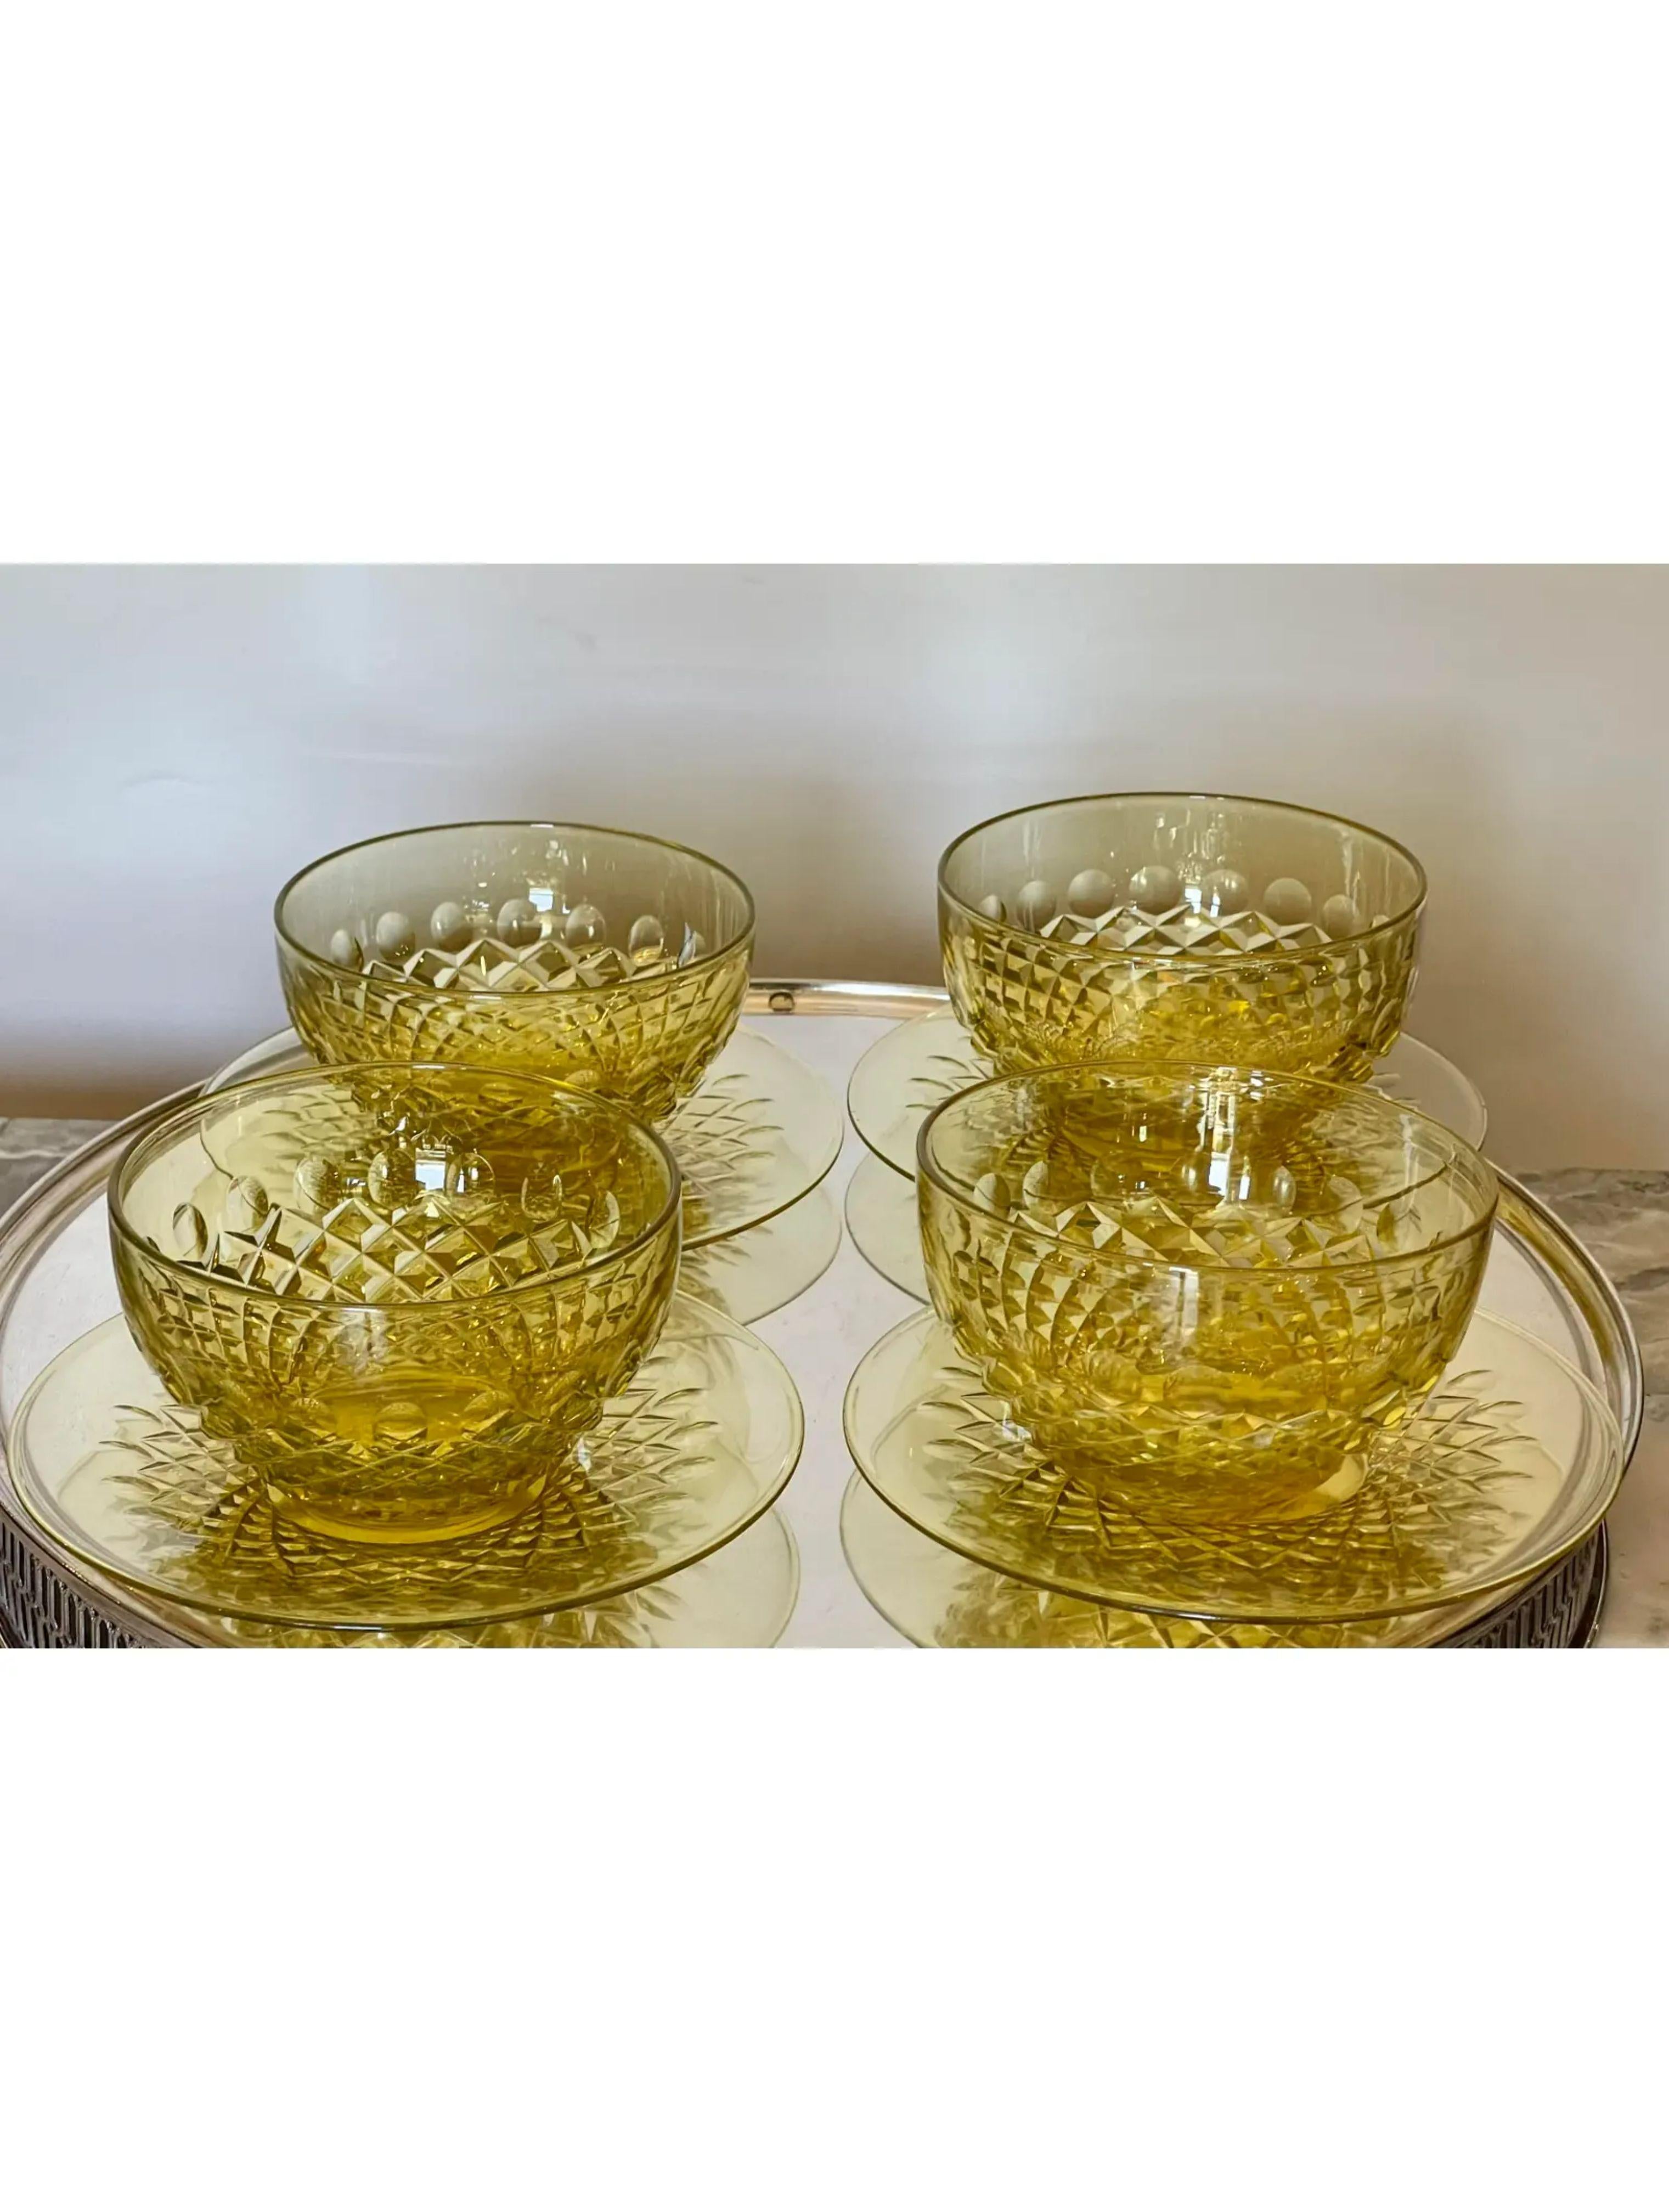 20th Century Antique Frederick Carder for Steuben Yellow Crystal Bowls & Underplates 8 Pc Set For Sale